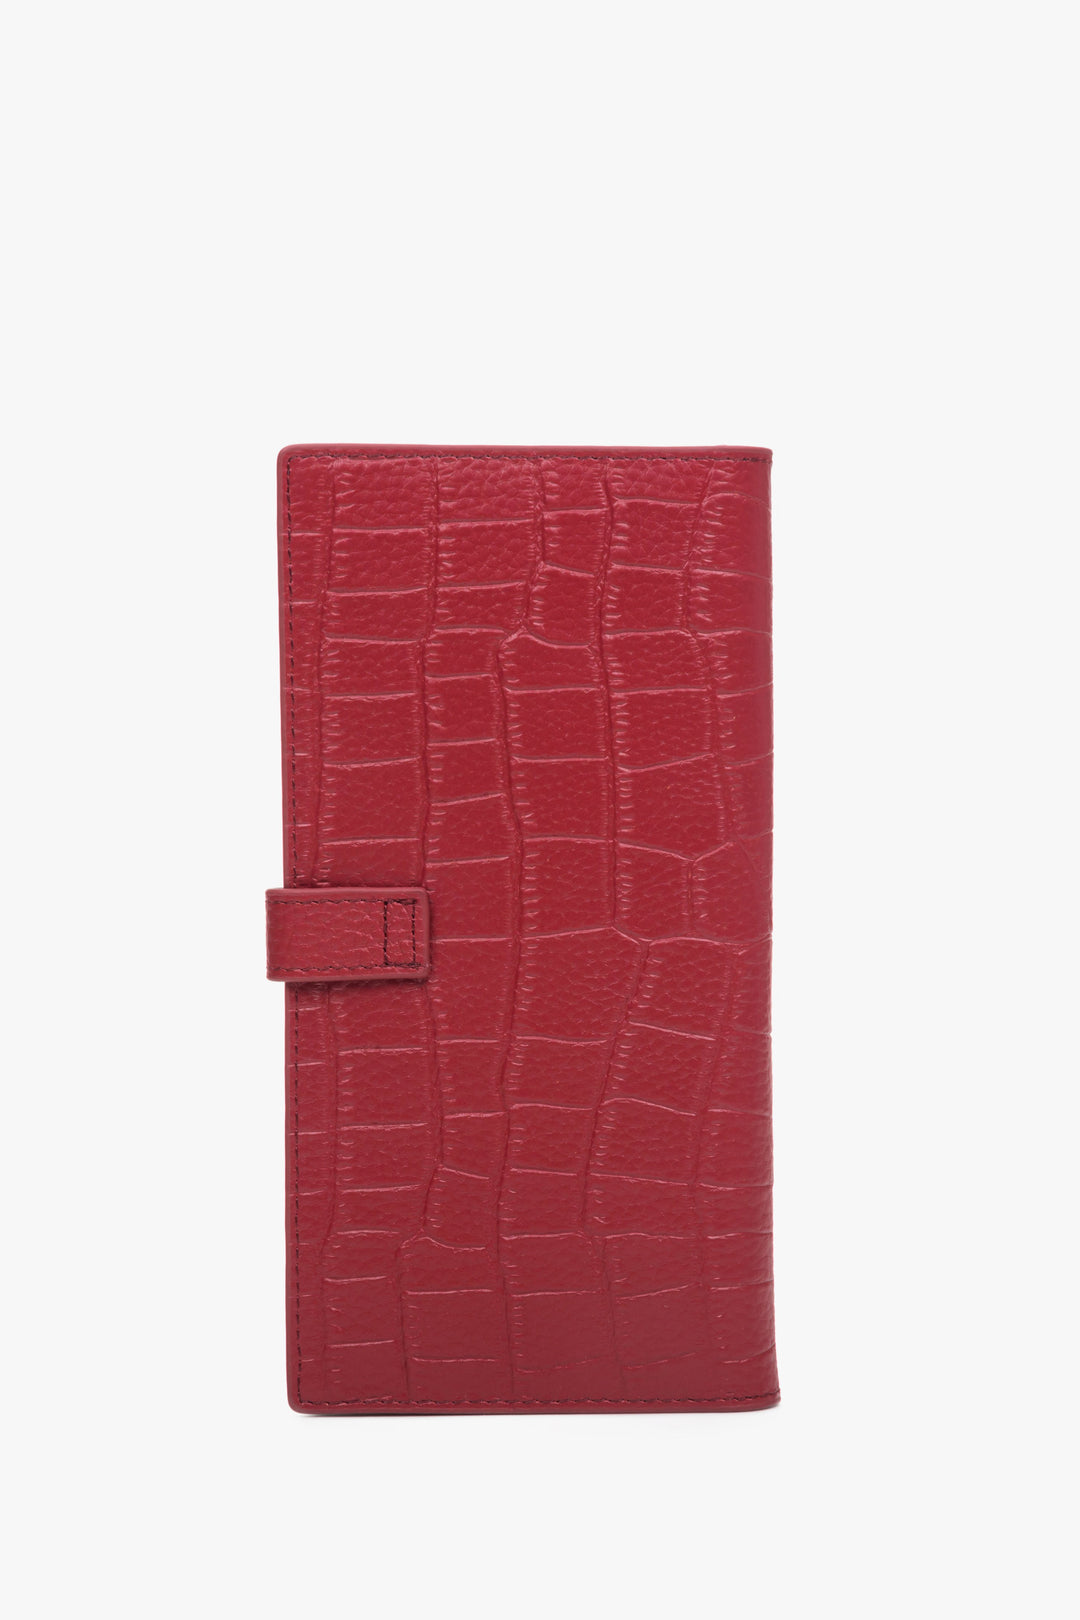 The back of a large red women's wallet made of embossed genuine leather with silver details by Estro.